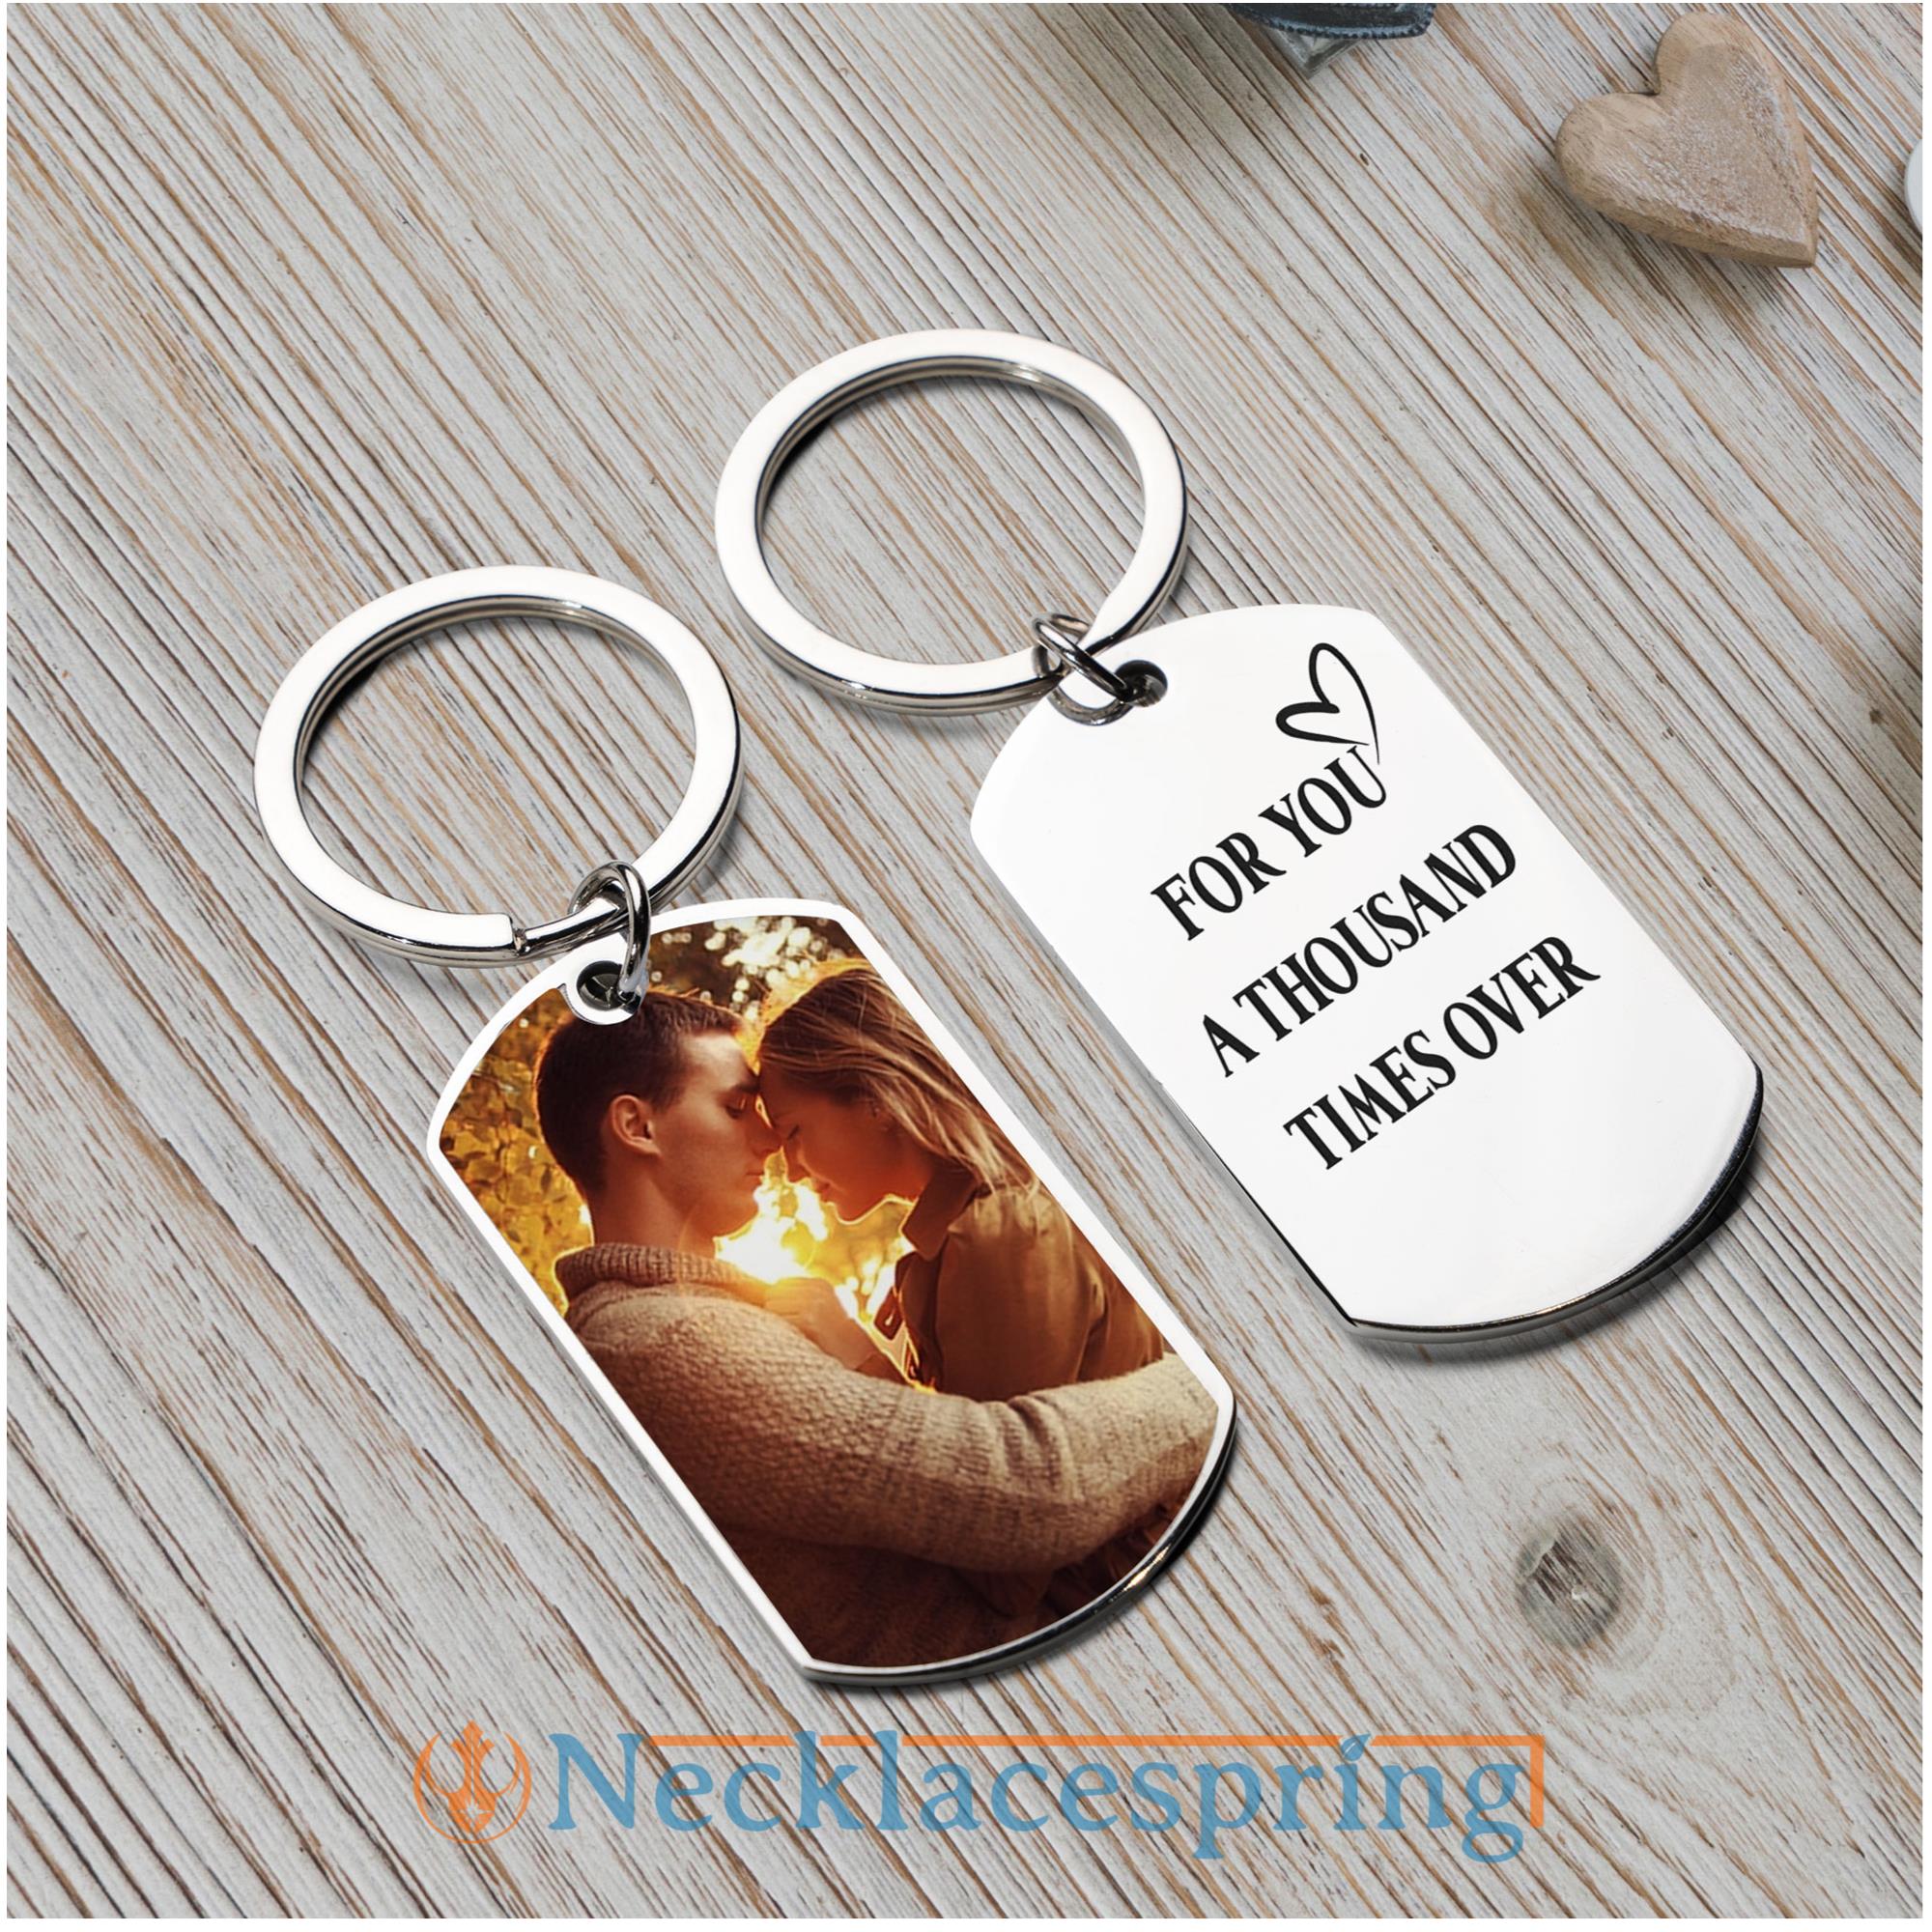 Custom Keychains. Printing on Keychains. Design Your Own.